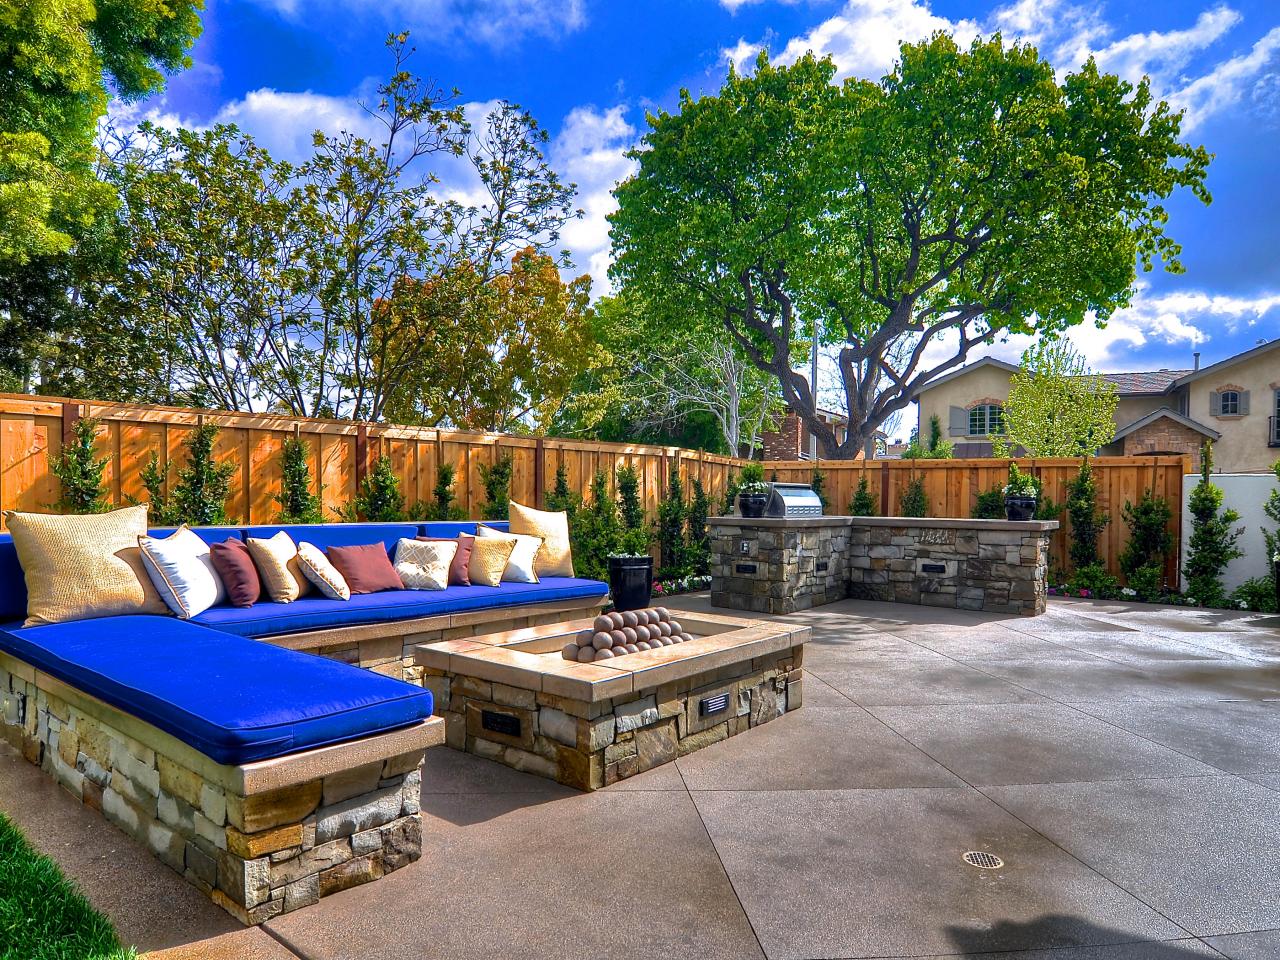 DP_Kevin Smith mixed color traditional outdoors backyard barbecue_h